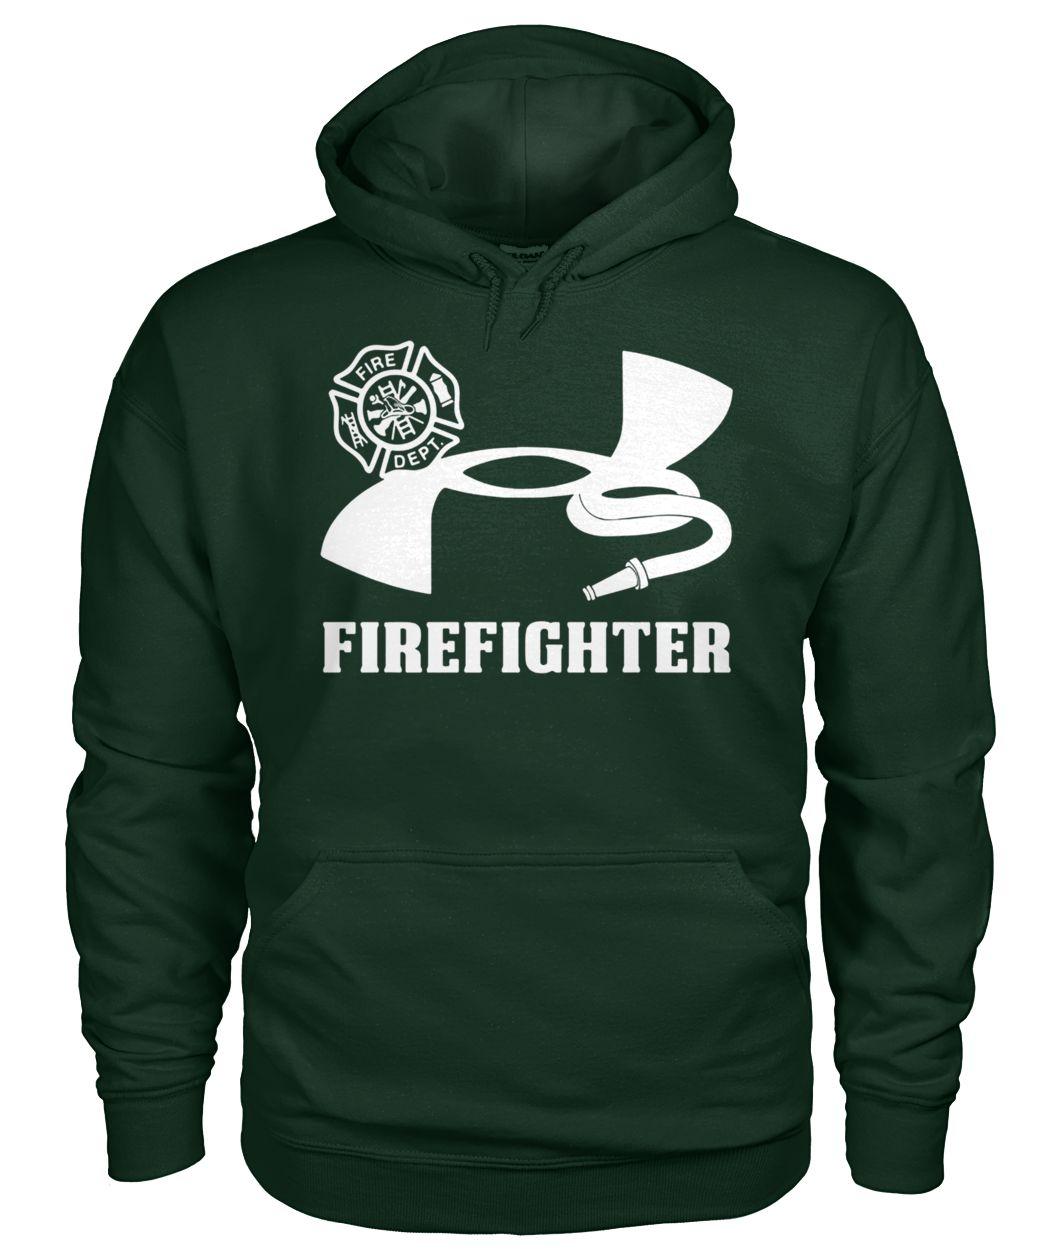 Under armour firefighter hoodie